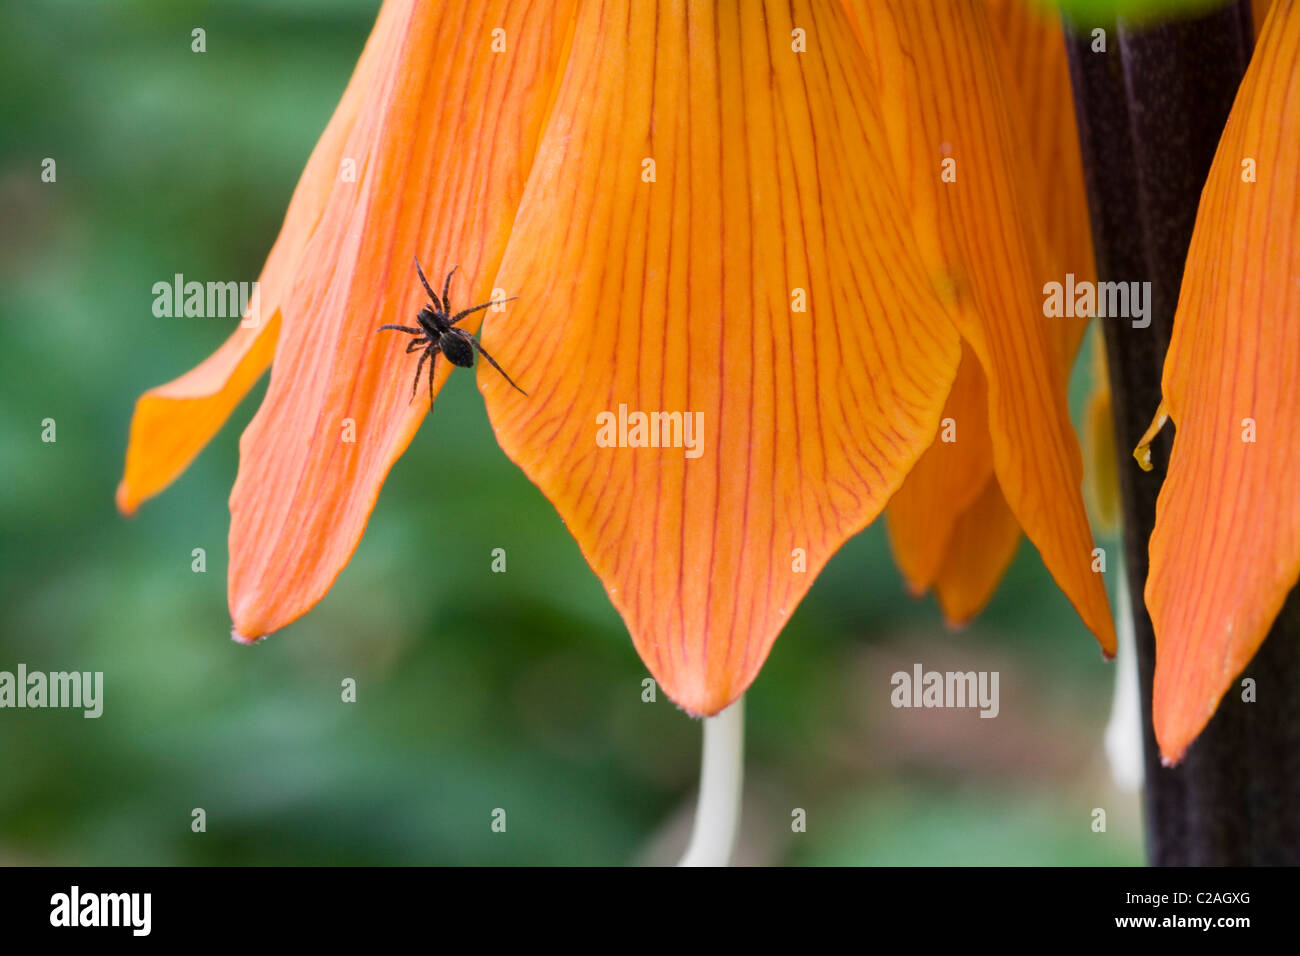 Fritillaria imperialis Crown Imperial Flower in Full Bloom with A common Black Garden Spider on Leaf Stock Photo